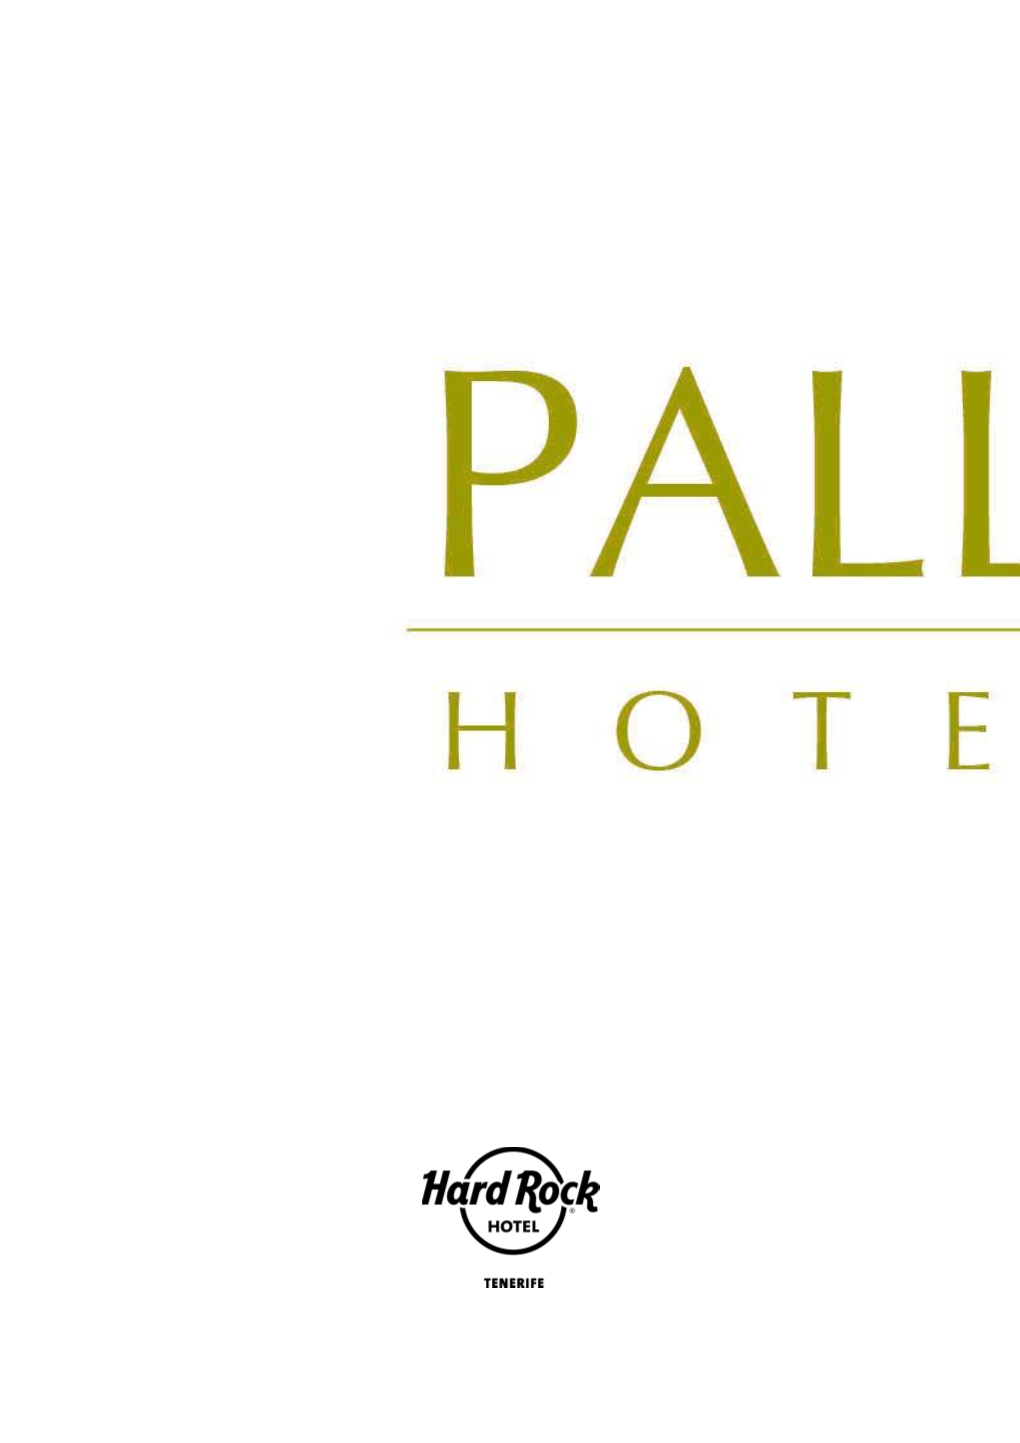 Palladium Hotel Hard Rock International Group and Join in the Creation of a New Hotel Complex